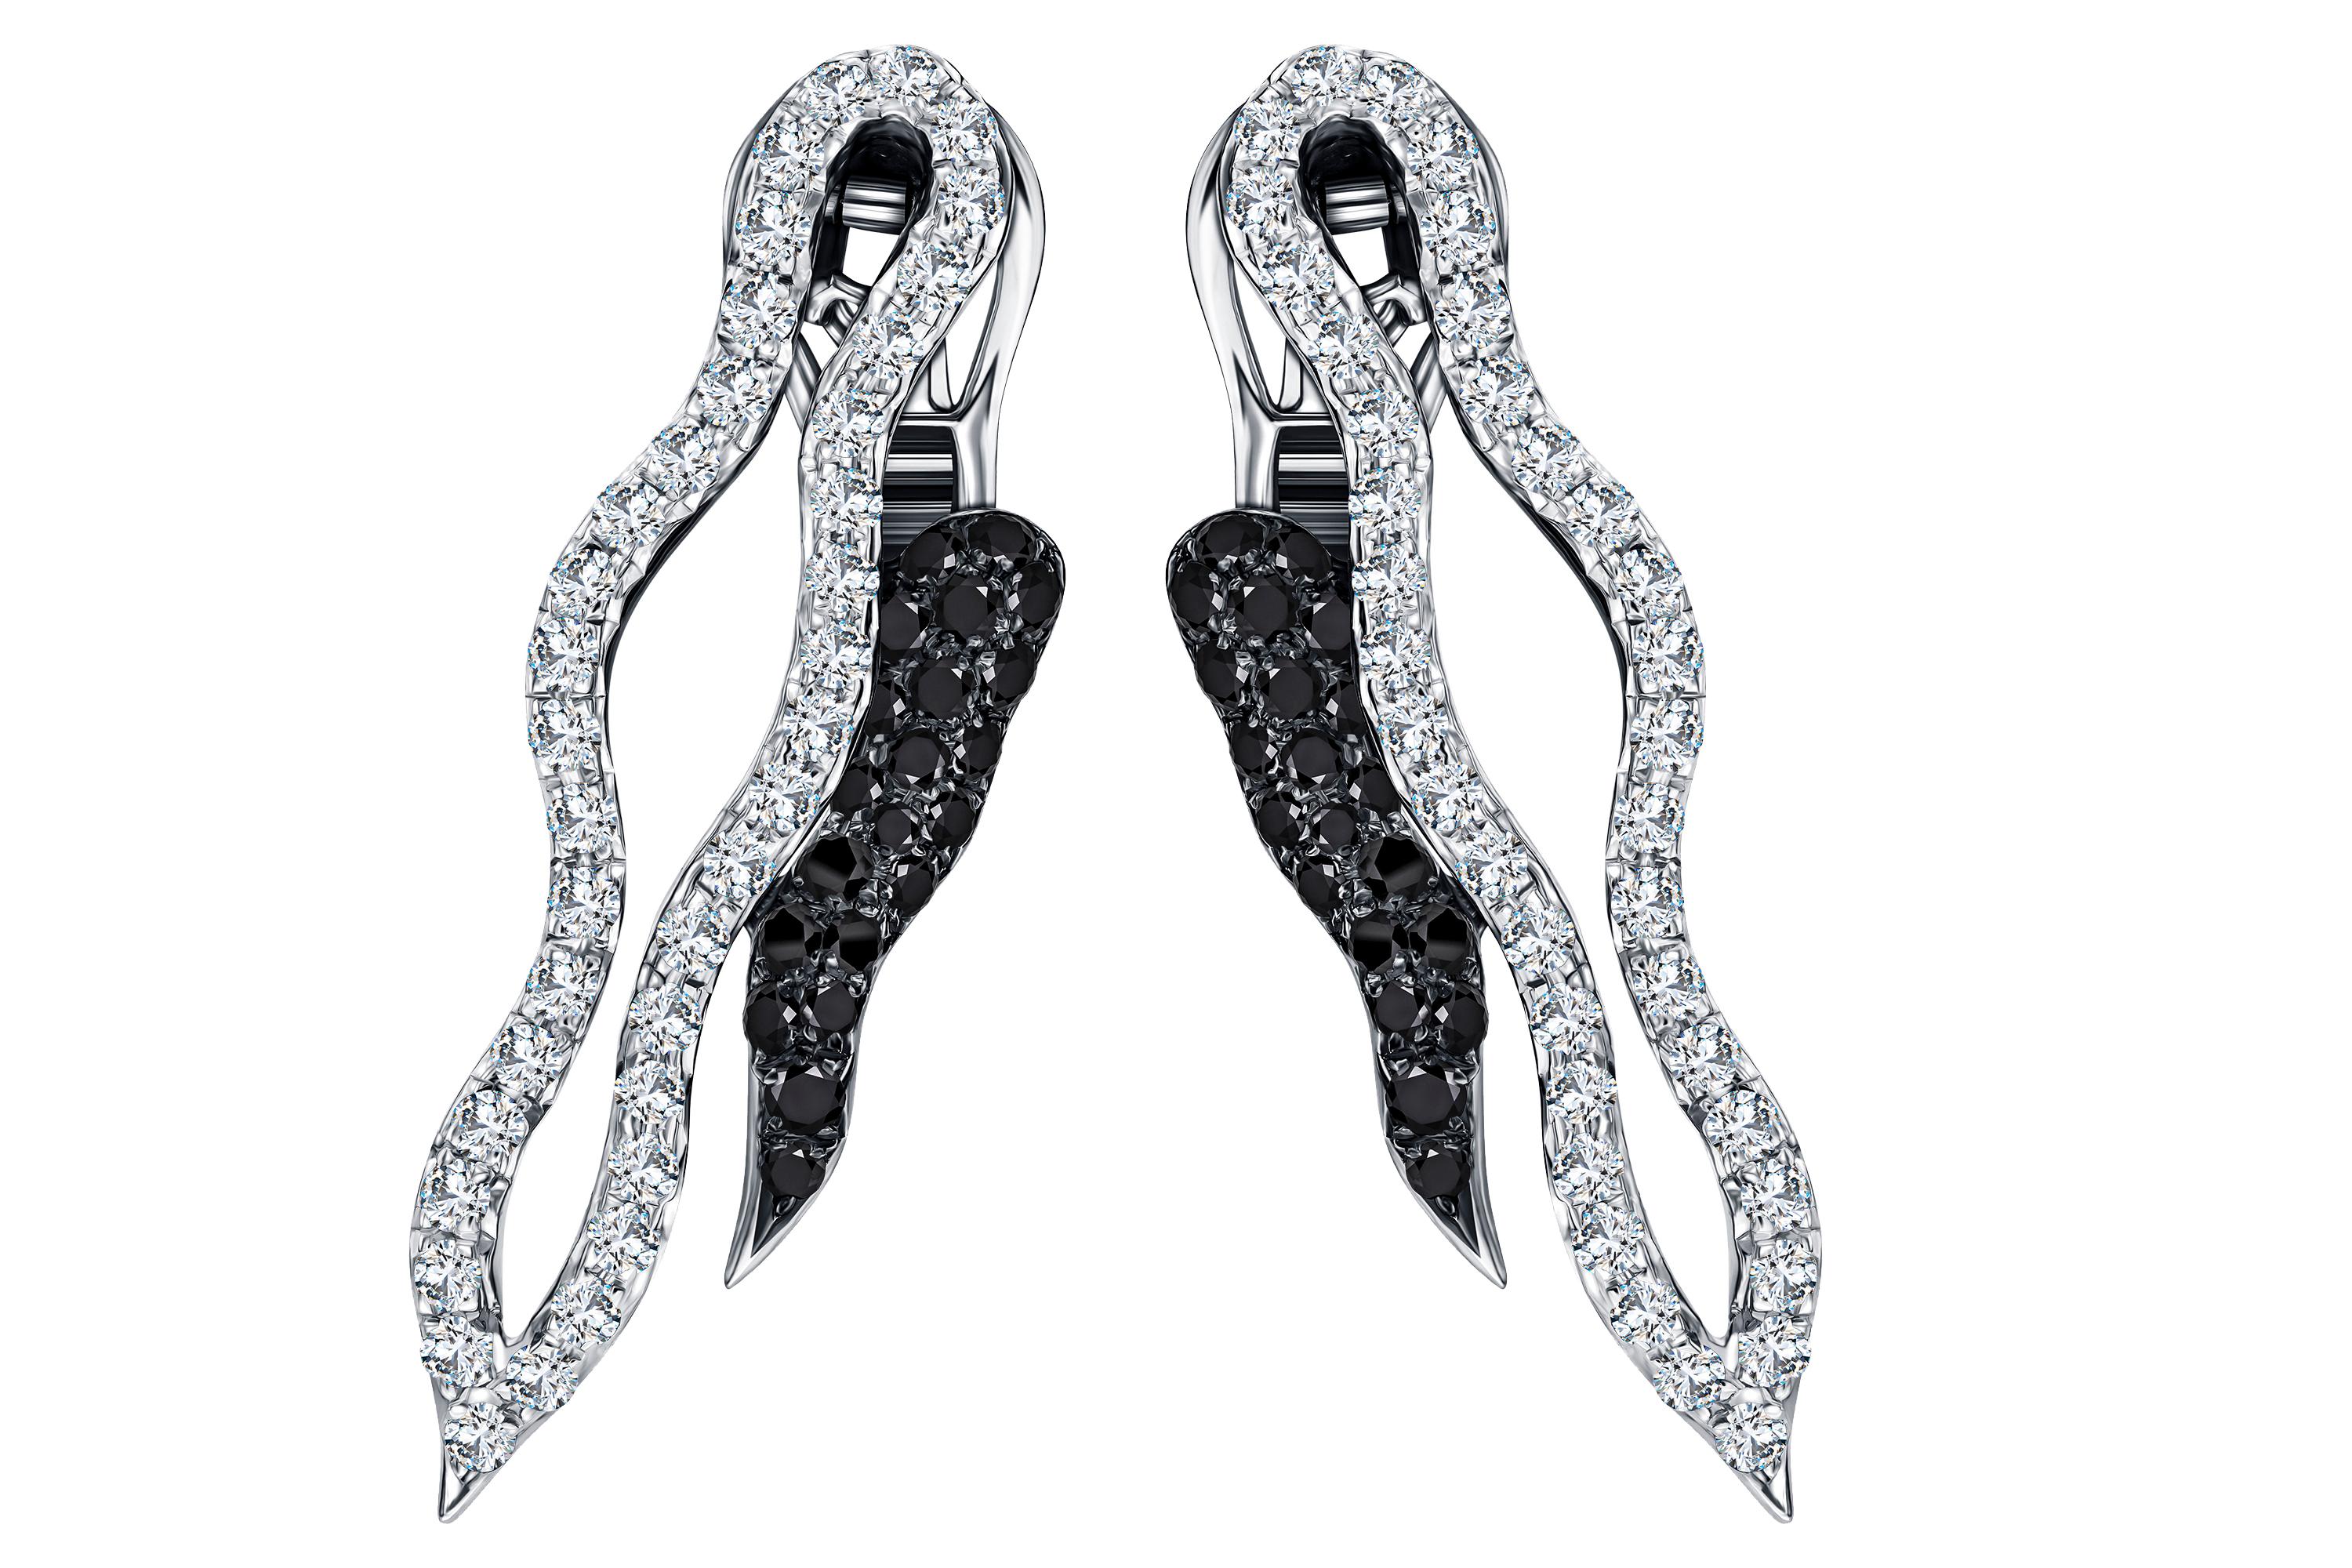 These stunning 18 Karat White Gold earrings feature 2.12 Carats of Round Brilliant White Diamonds F/G -VS1 and 1.17 Carats of Round Brilliant Black Diamonds. British Hallmark by The London Assay Office, certified by the IGR.
There is a matching